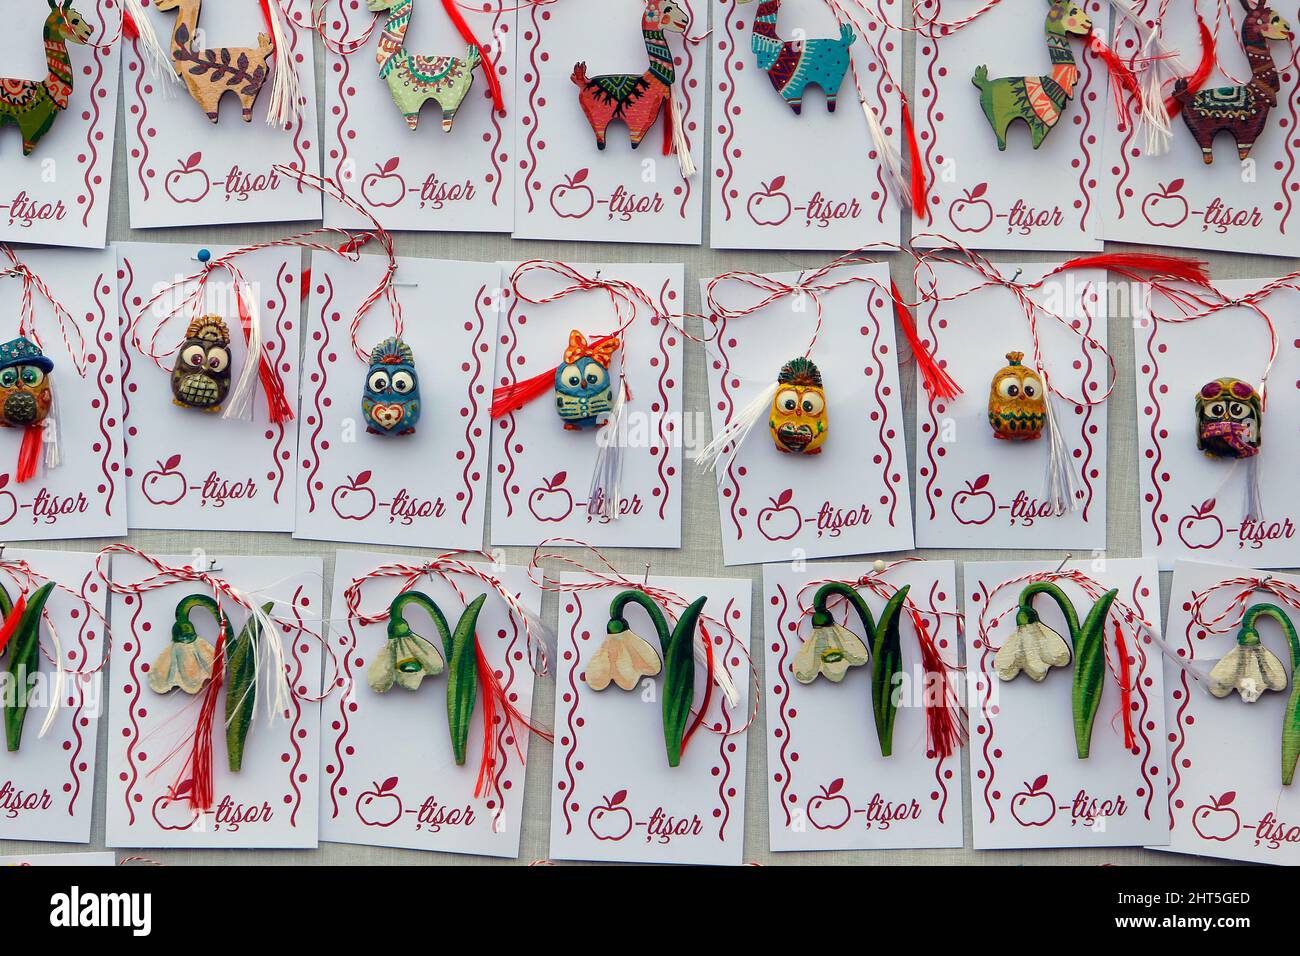 Bucharest, Romania. 26th Feb, 2022. Small handmade figurines called 'Martisor' are displayed during the 'Martisor Fair' in Bucharest, capital of Romania, Feb. 26, 2022. Martisor is a small decoration tied with a red-and-white twisted string, given to women on the 1st of March as a token of appreciation, love or friendship and as a wish of health, being at the same time a symbol of the coming spring. Credit: Cristian Cristel/Xinhua/Alamy Live News Stock Photo